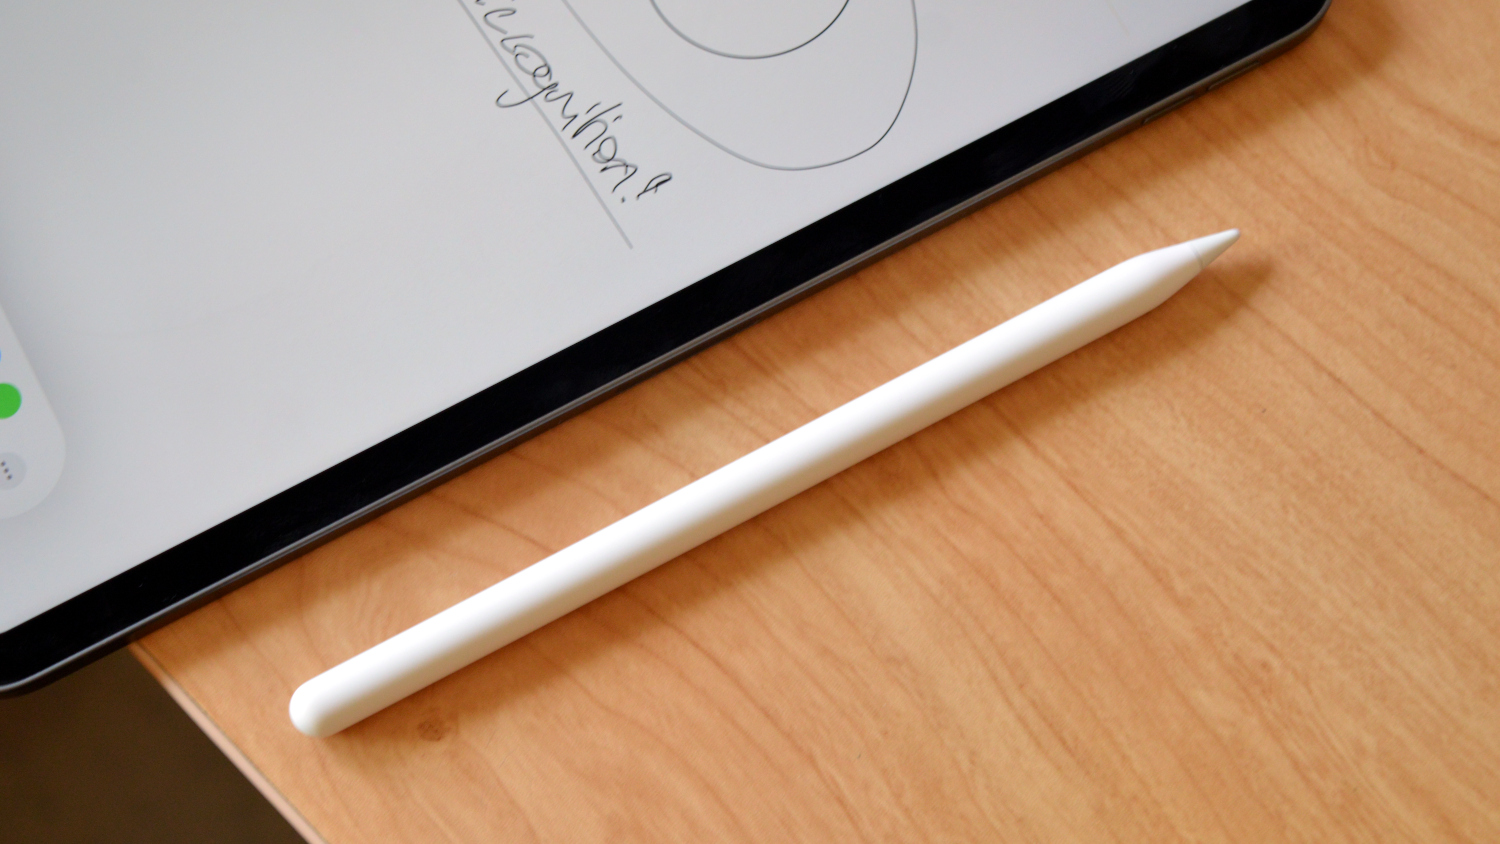 BOX ONLY] Apple Pencil 2nd Generation Box Only with Instructions